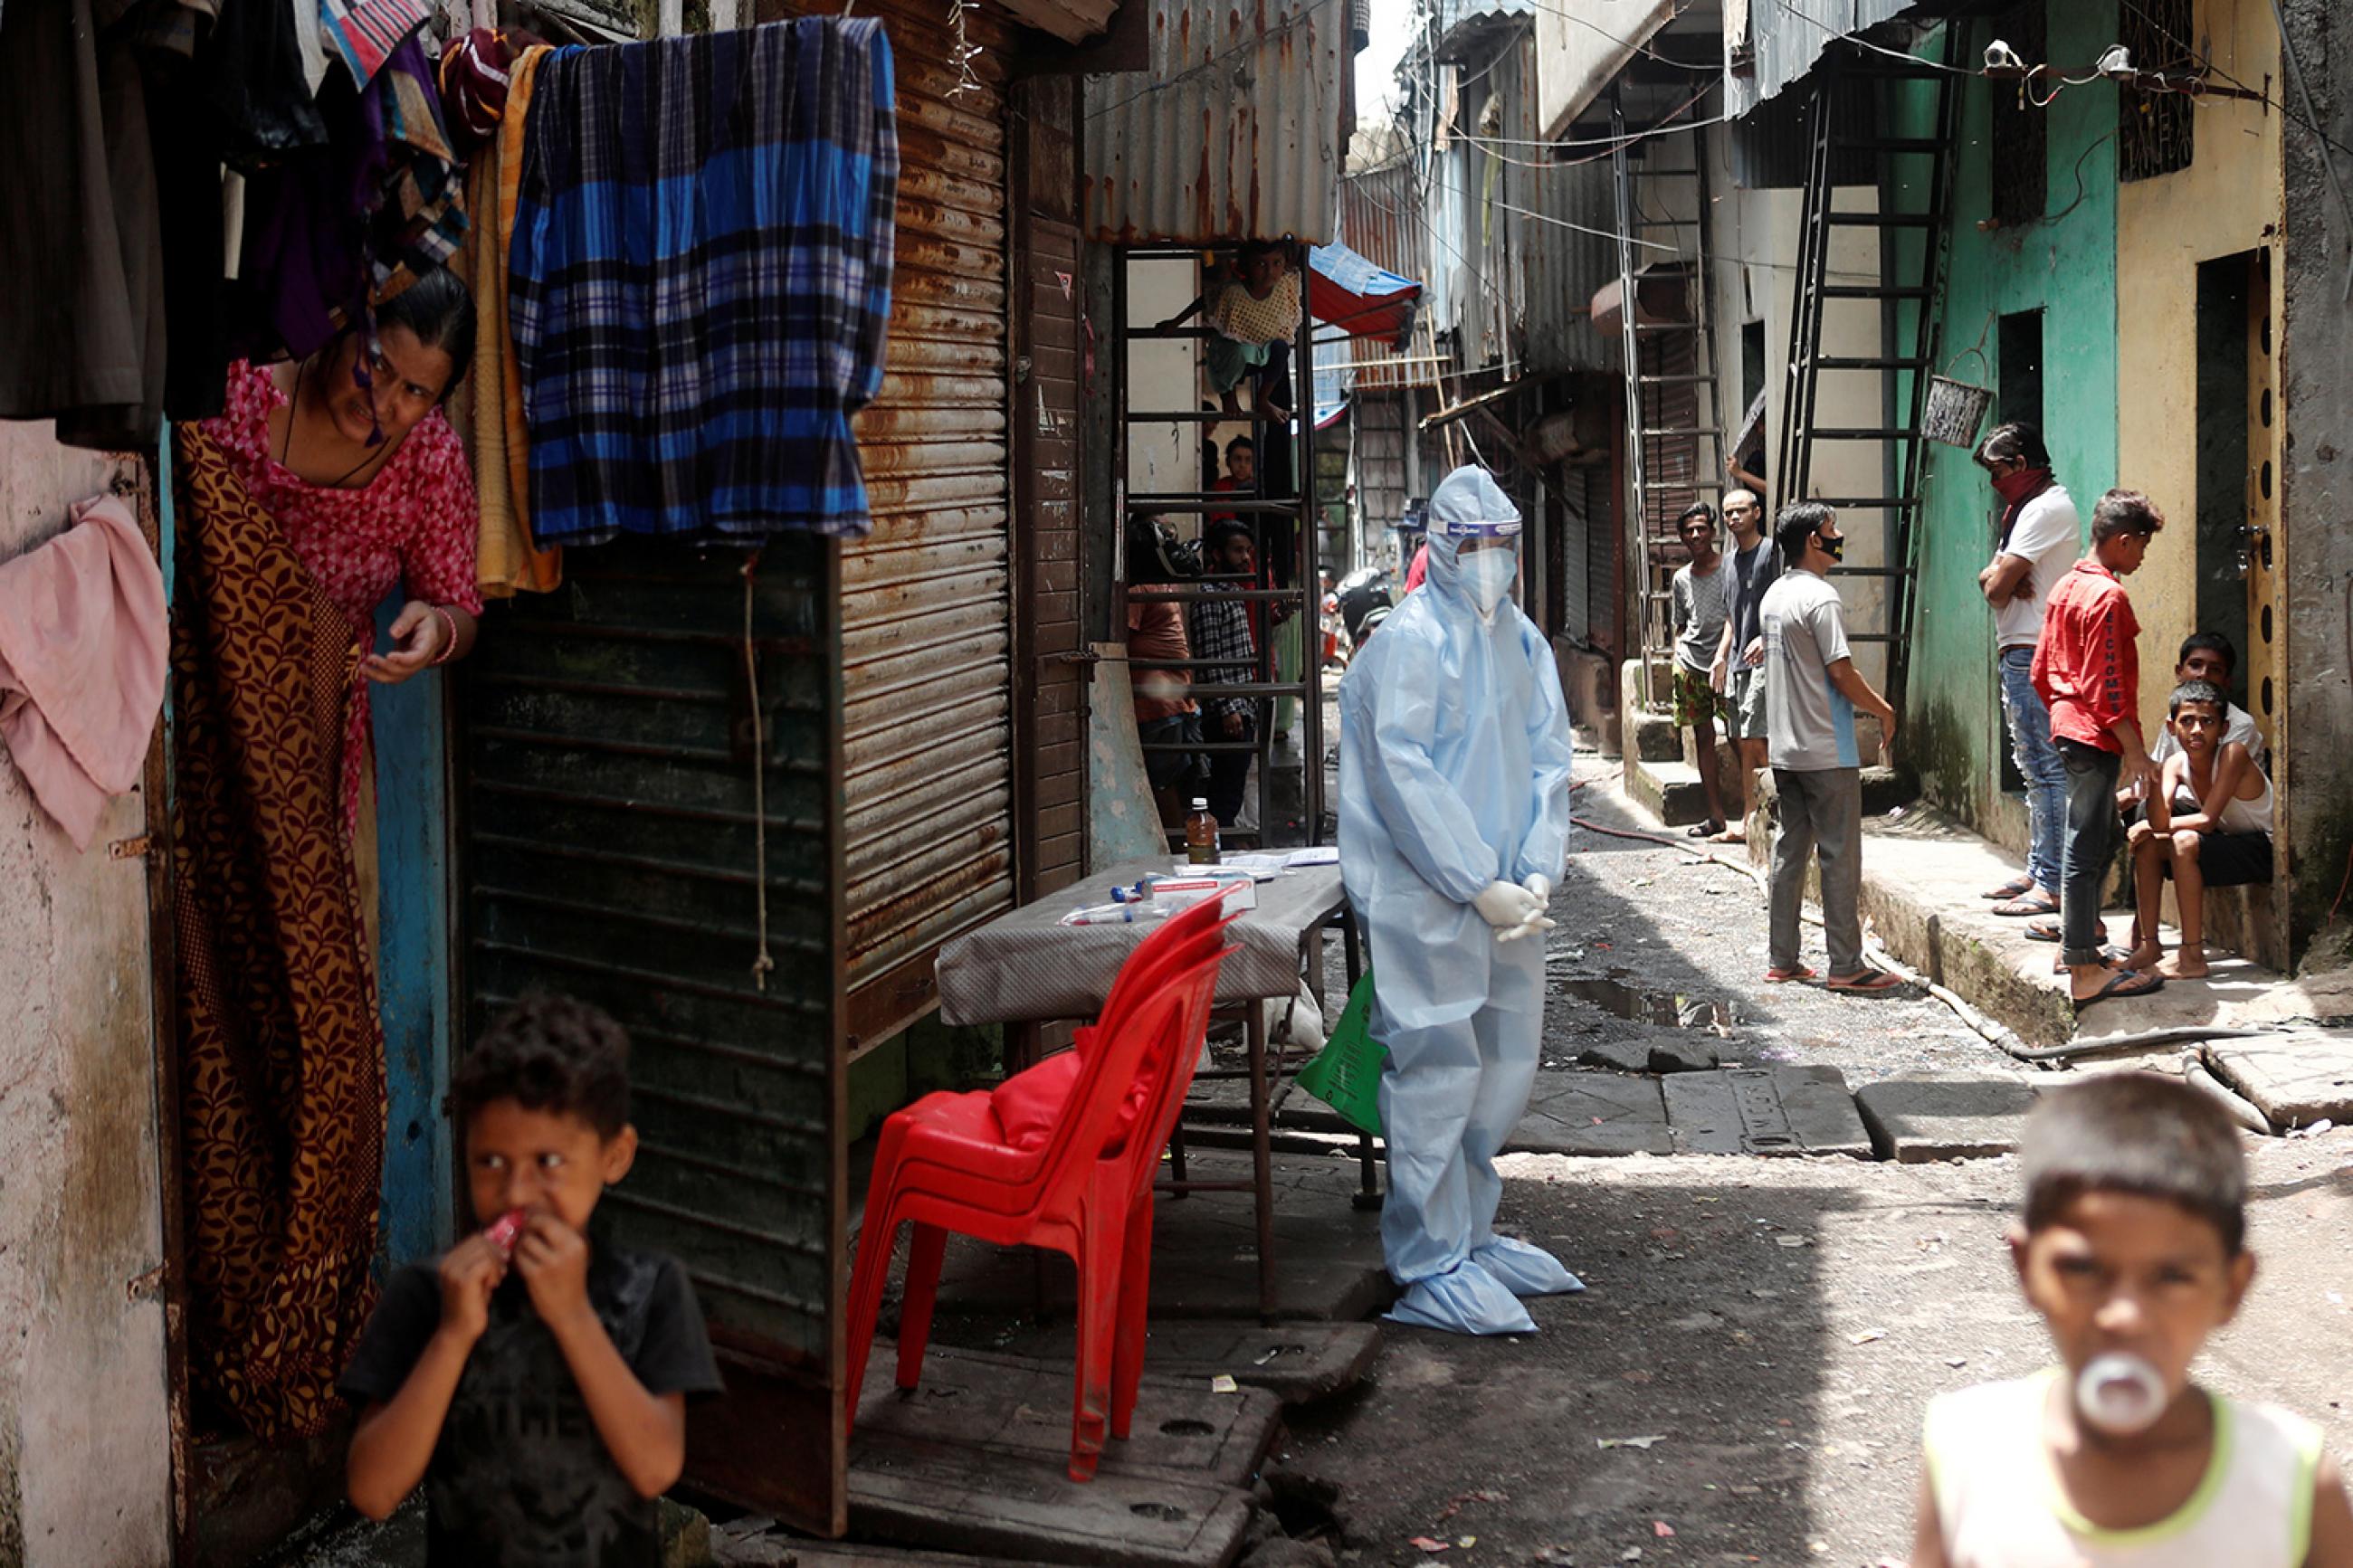 A health-care worker waits to test residents during a medical campaign for the coronavirus disease (COVID-19) at a slum area in Mumbai, India, June 30, 2020. The photo shows a worker wearing personal protective equipment standing awkwardly among residents, most of whom aren't even wearing a mask. REUTERS/Francis Mascarenhas